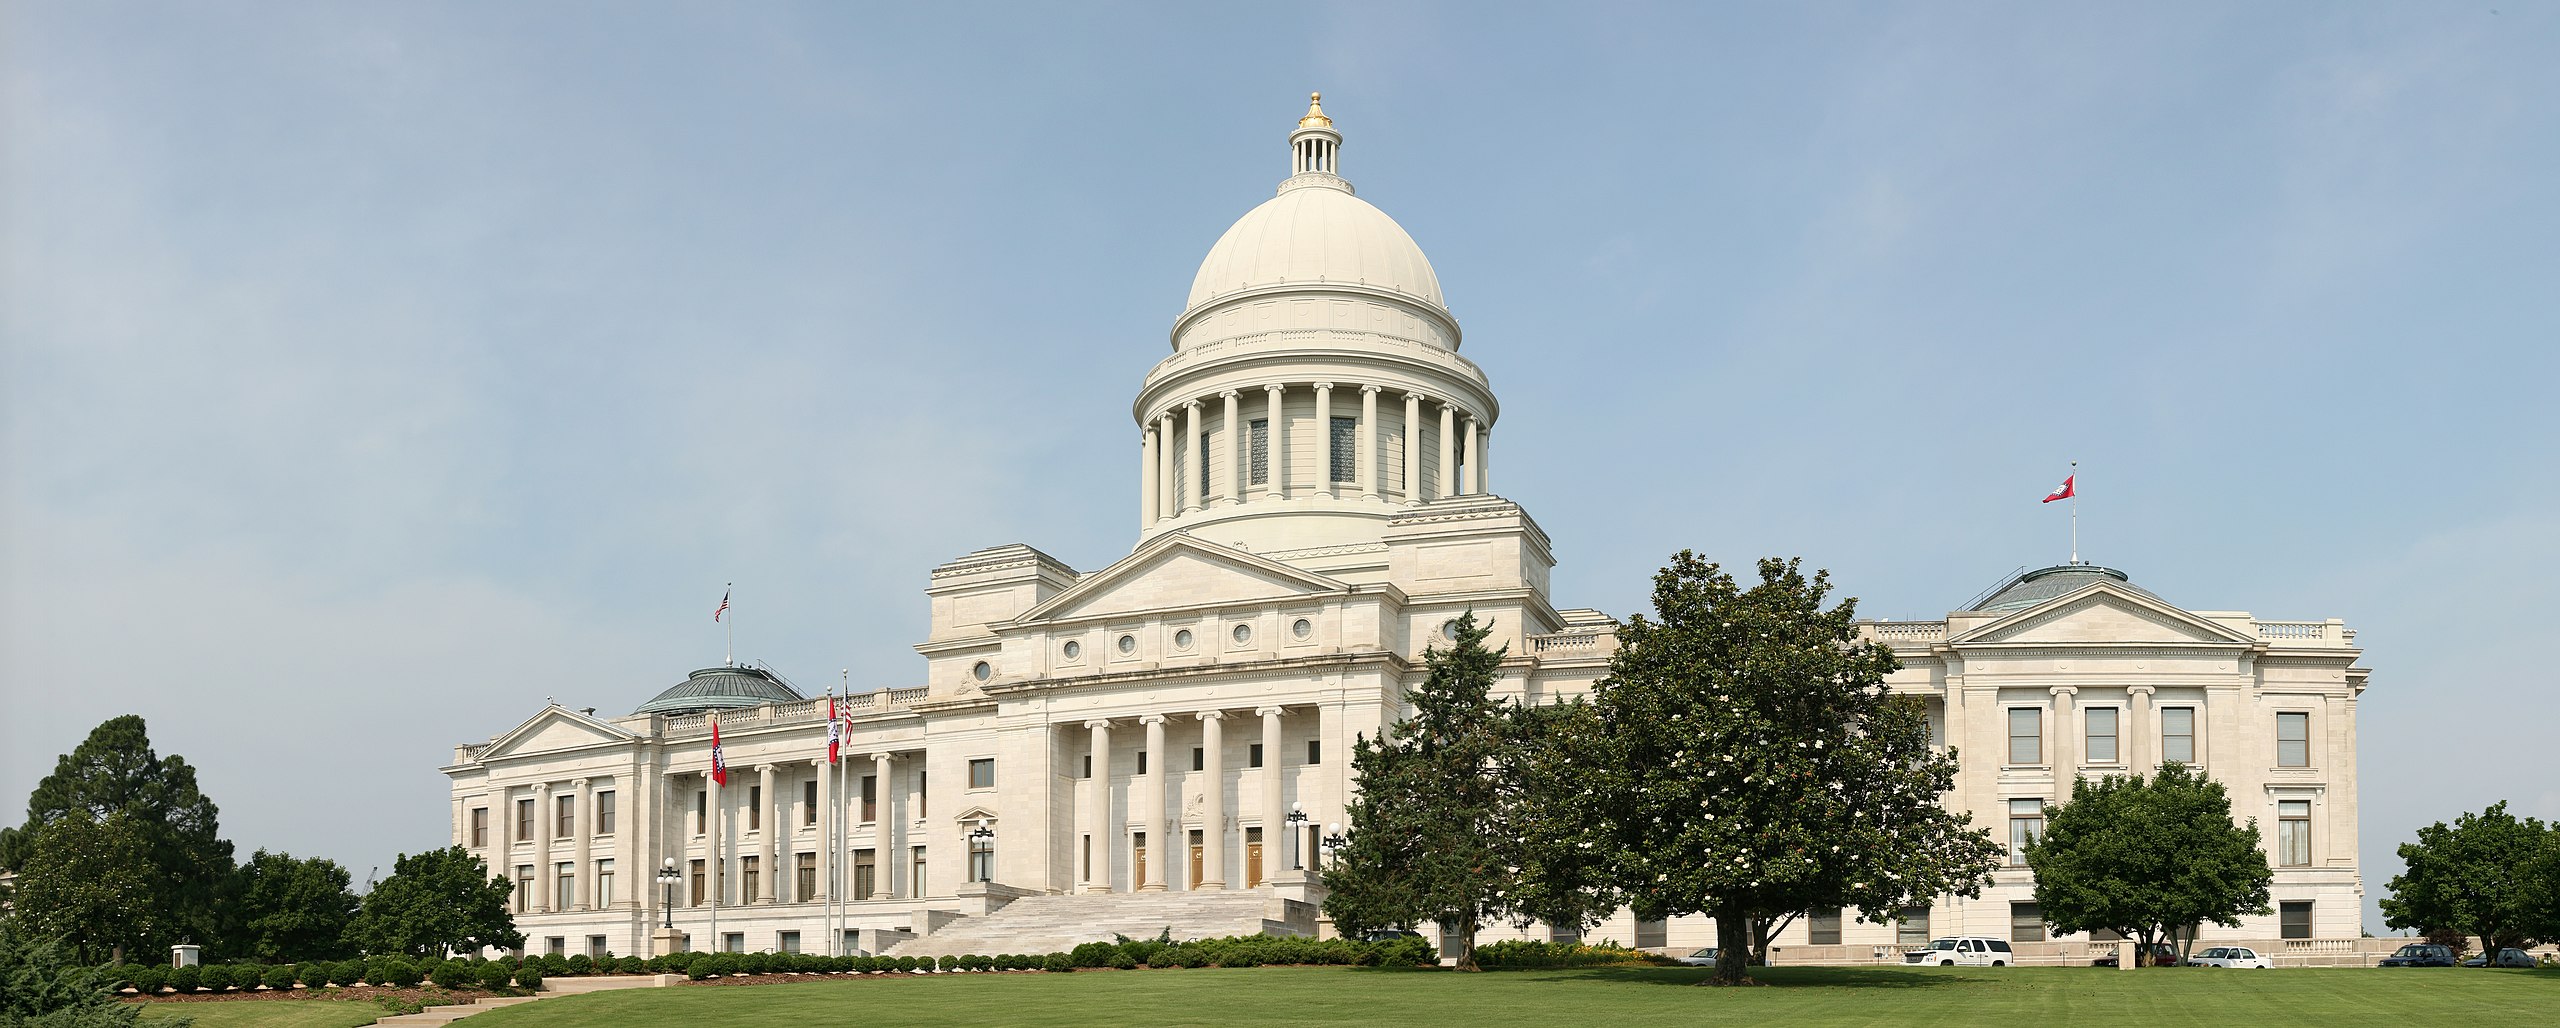 Arkansas Lawmakers Come Together on Bipartisan Hate Crime Bill